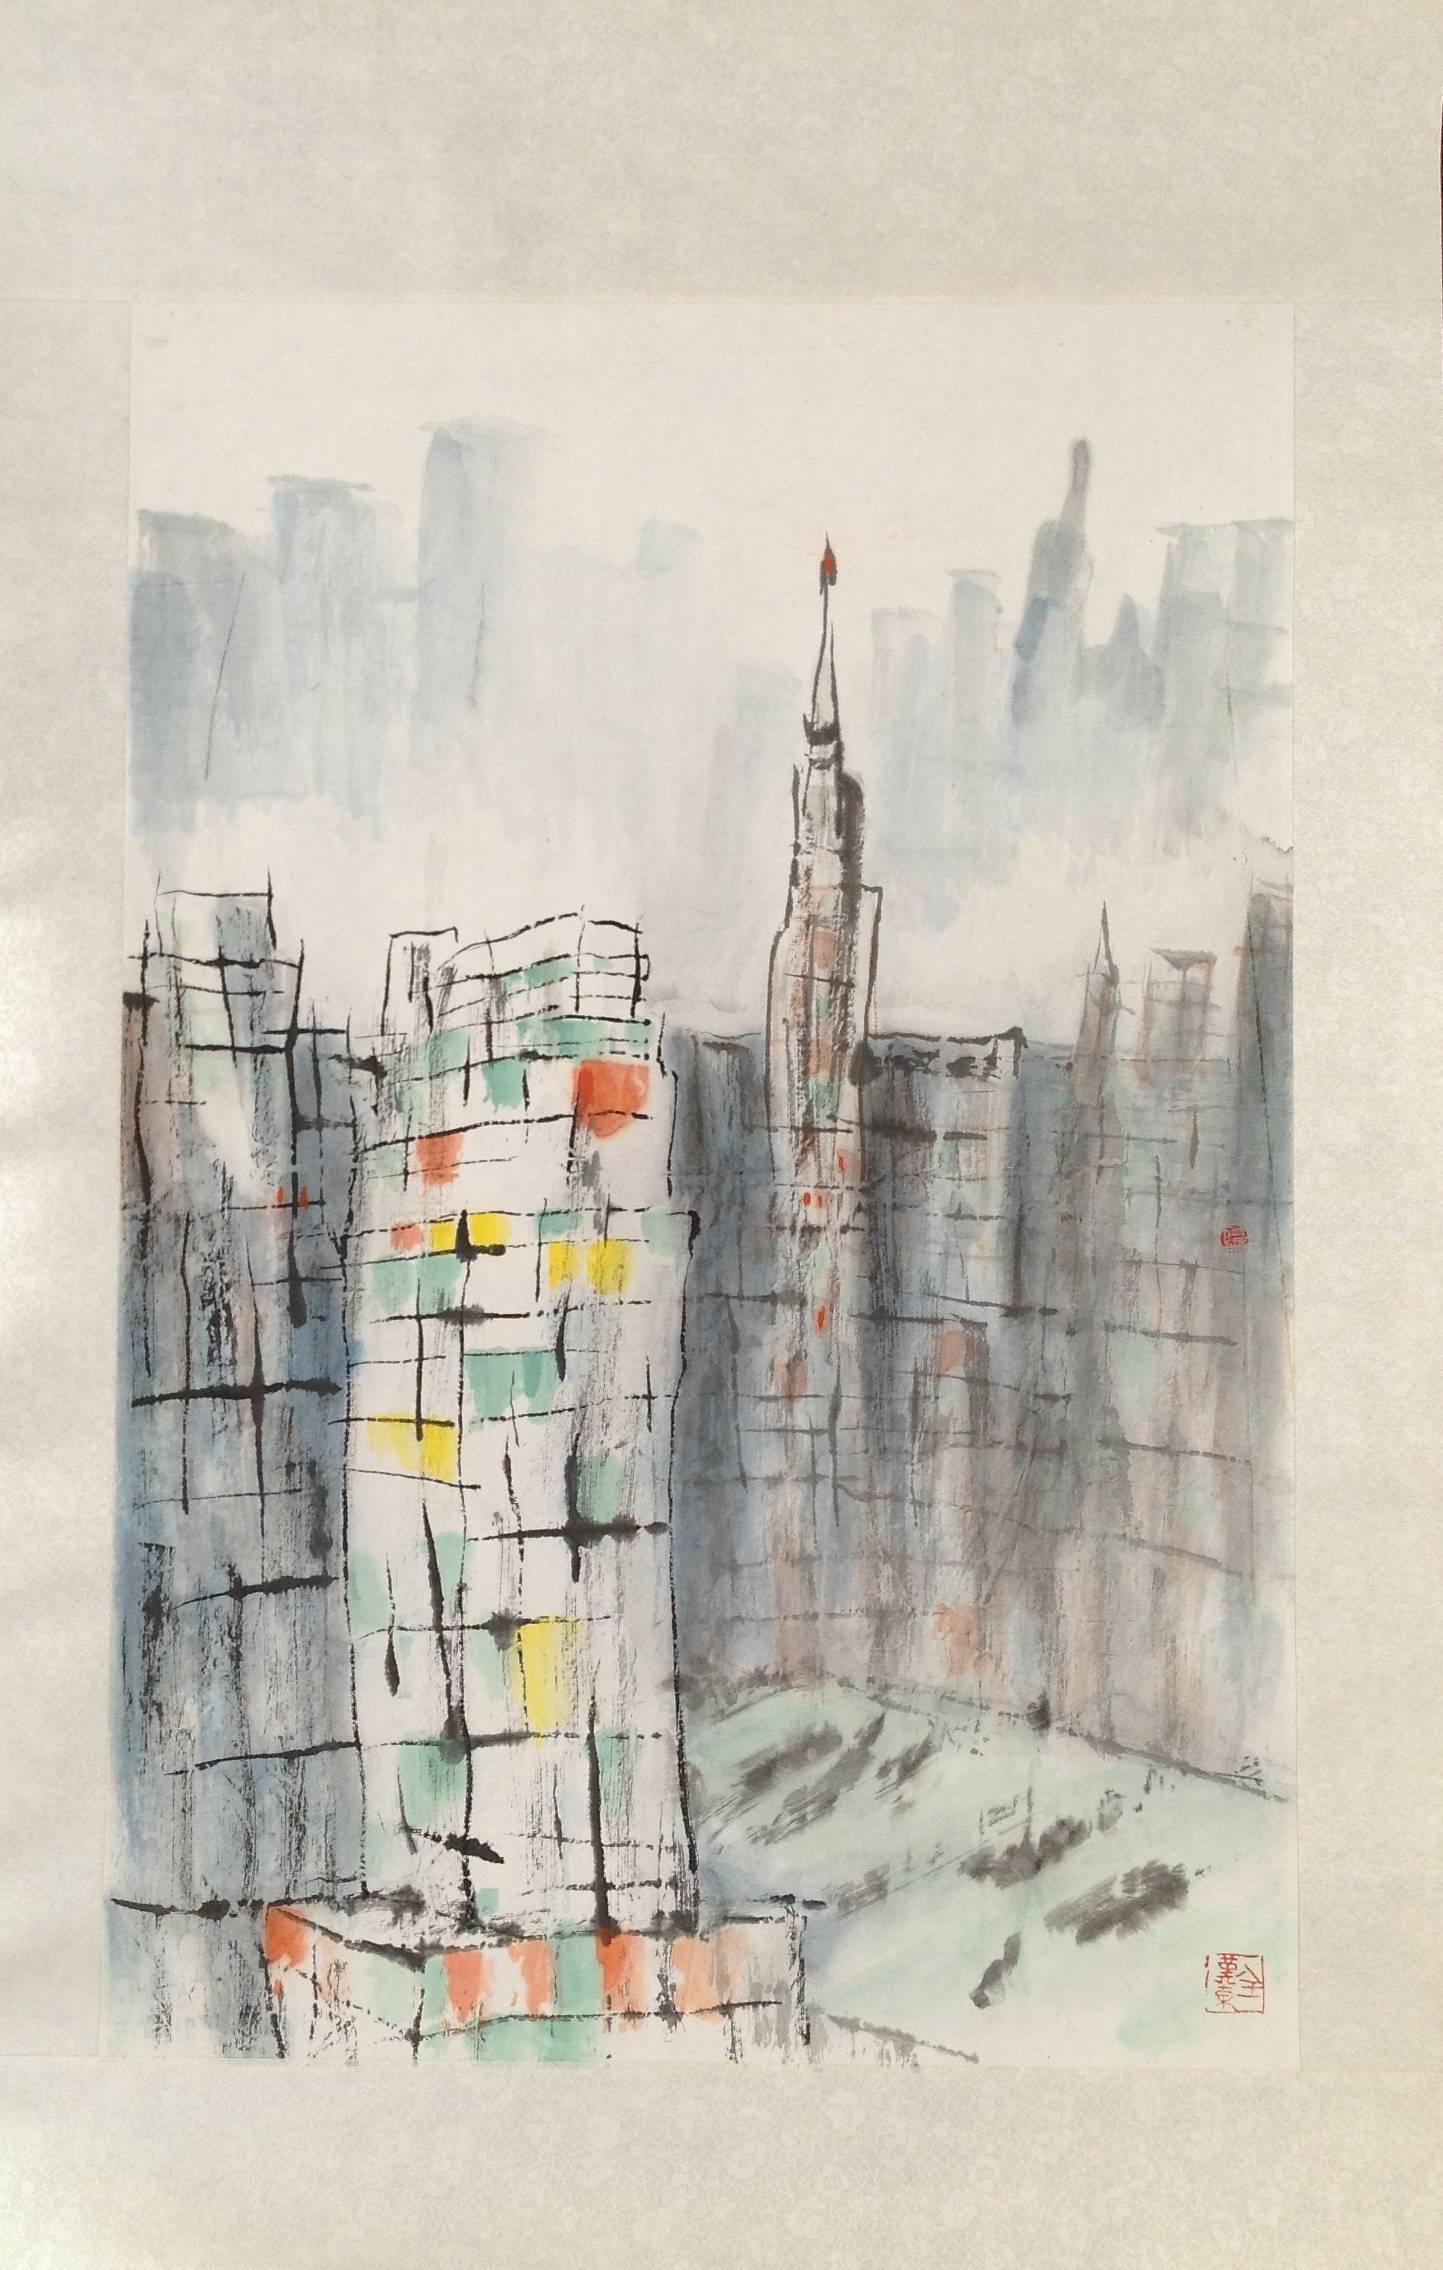 Quan Handong Abstract Drawing - "Behind The Wall #7" Chinese abstract cityscape ink on paper